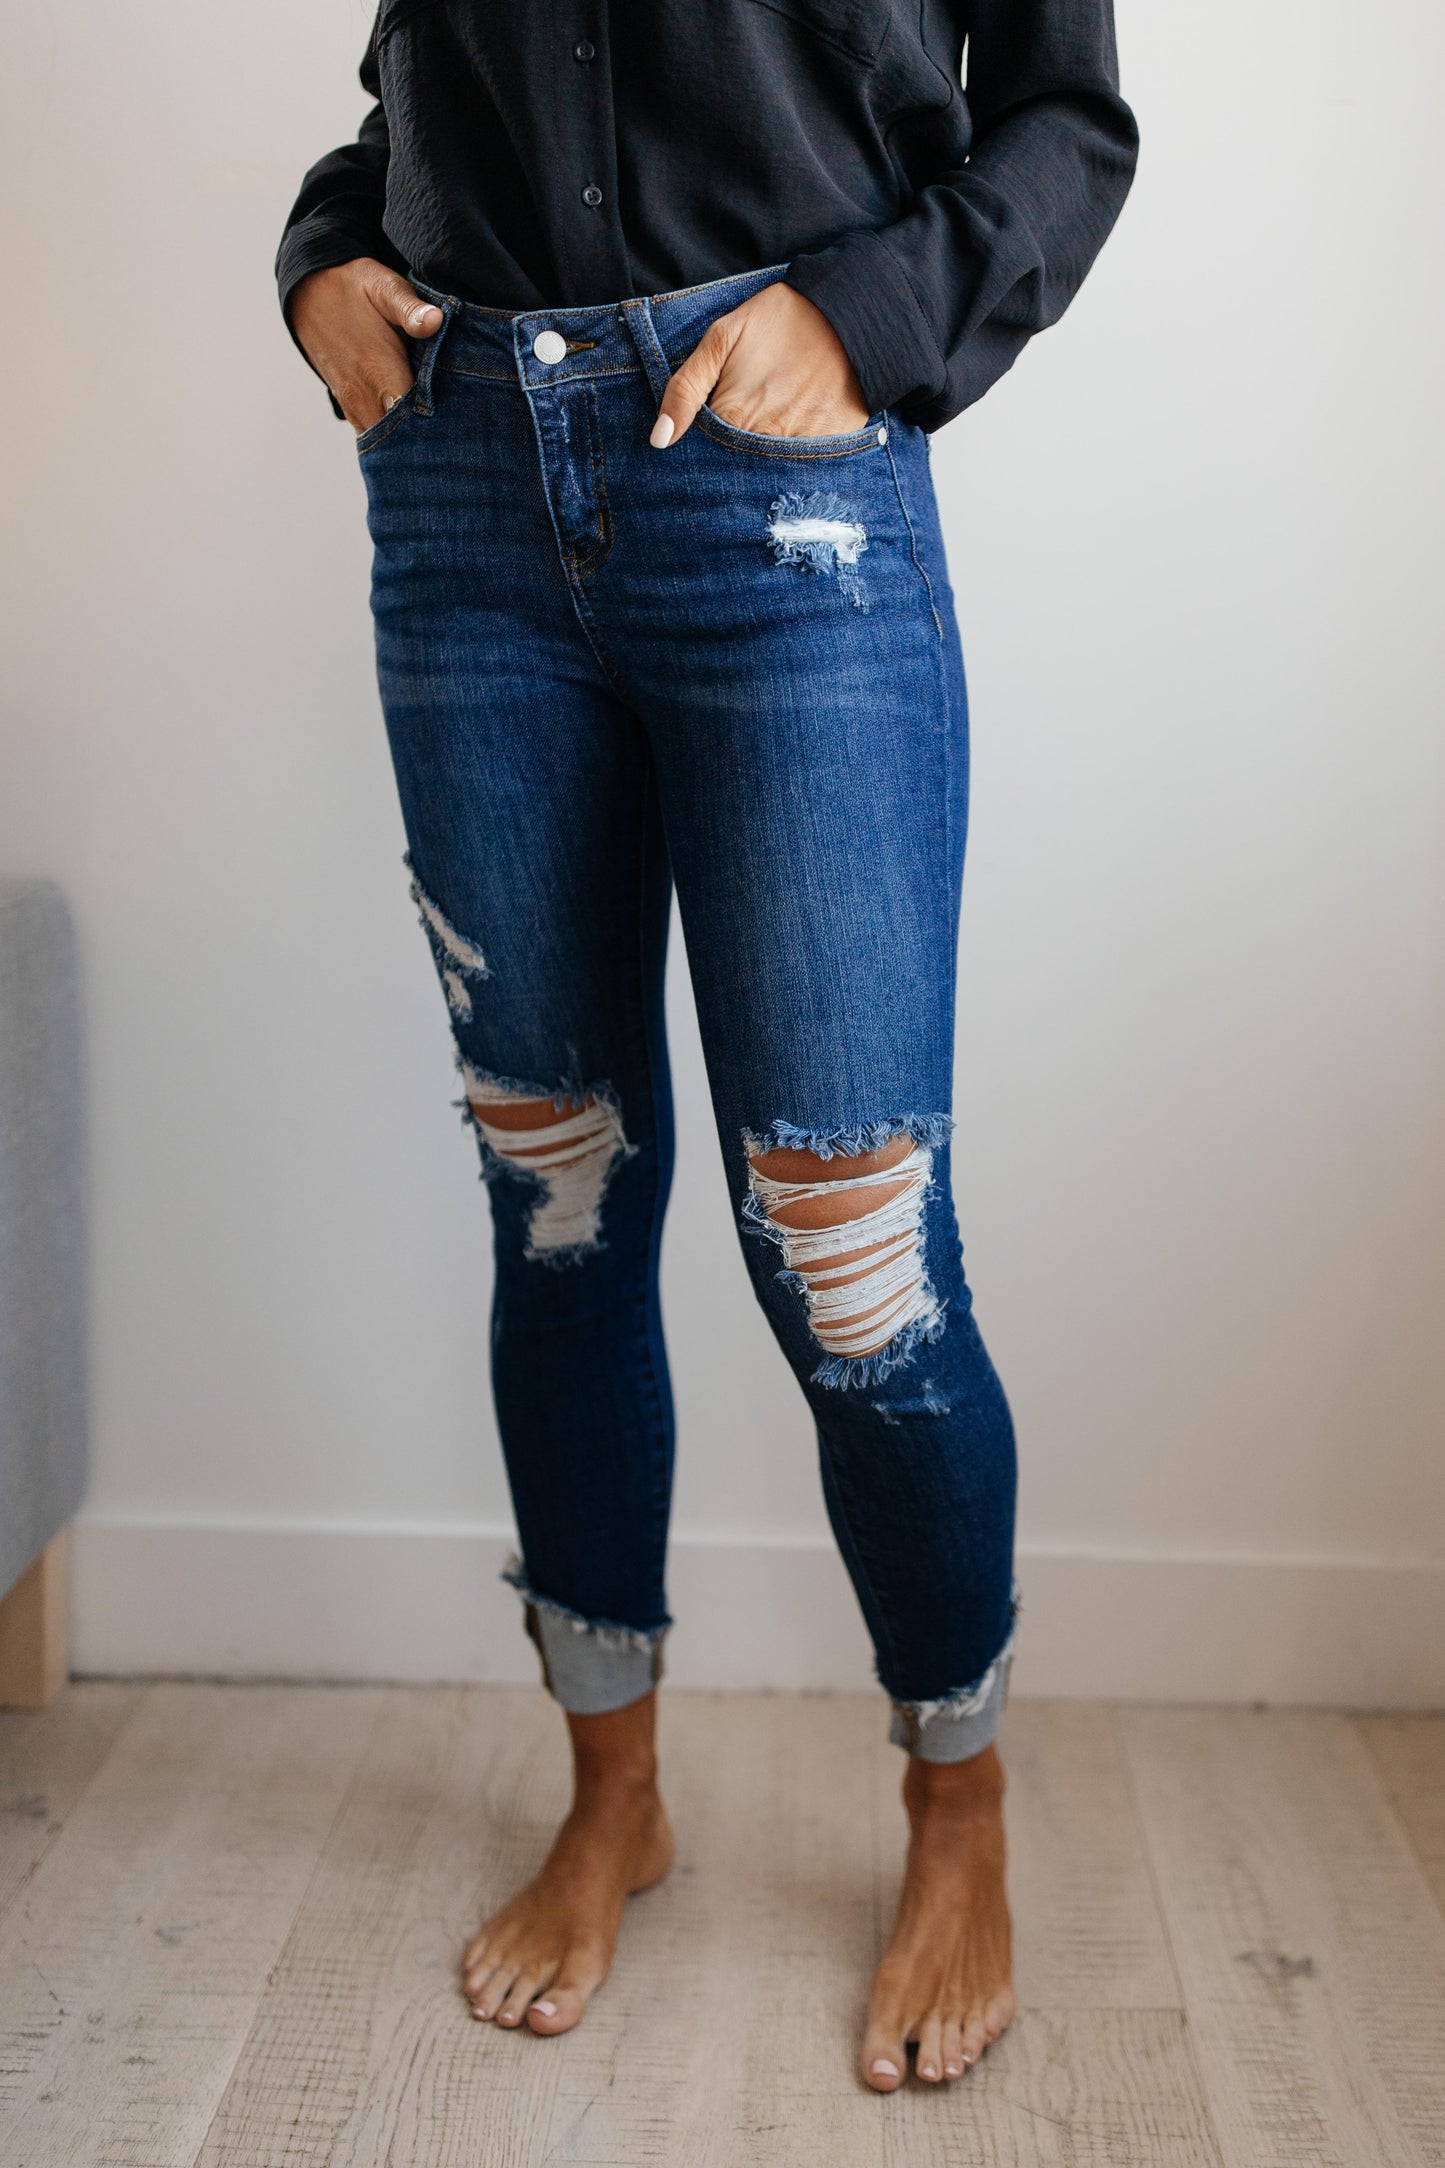 All About The Cuff Jeans